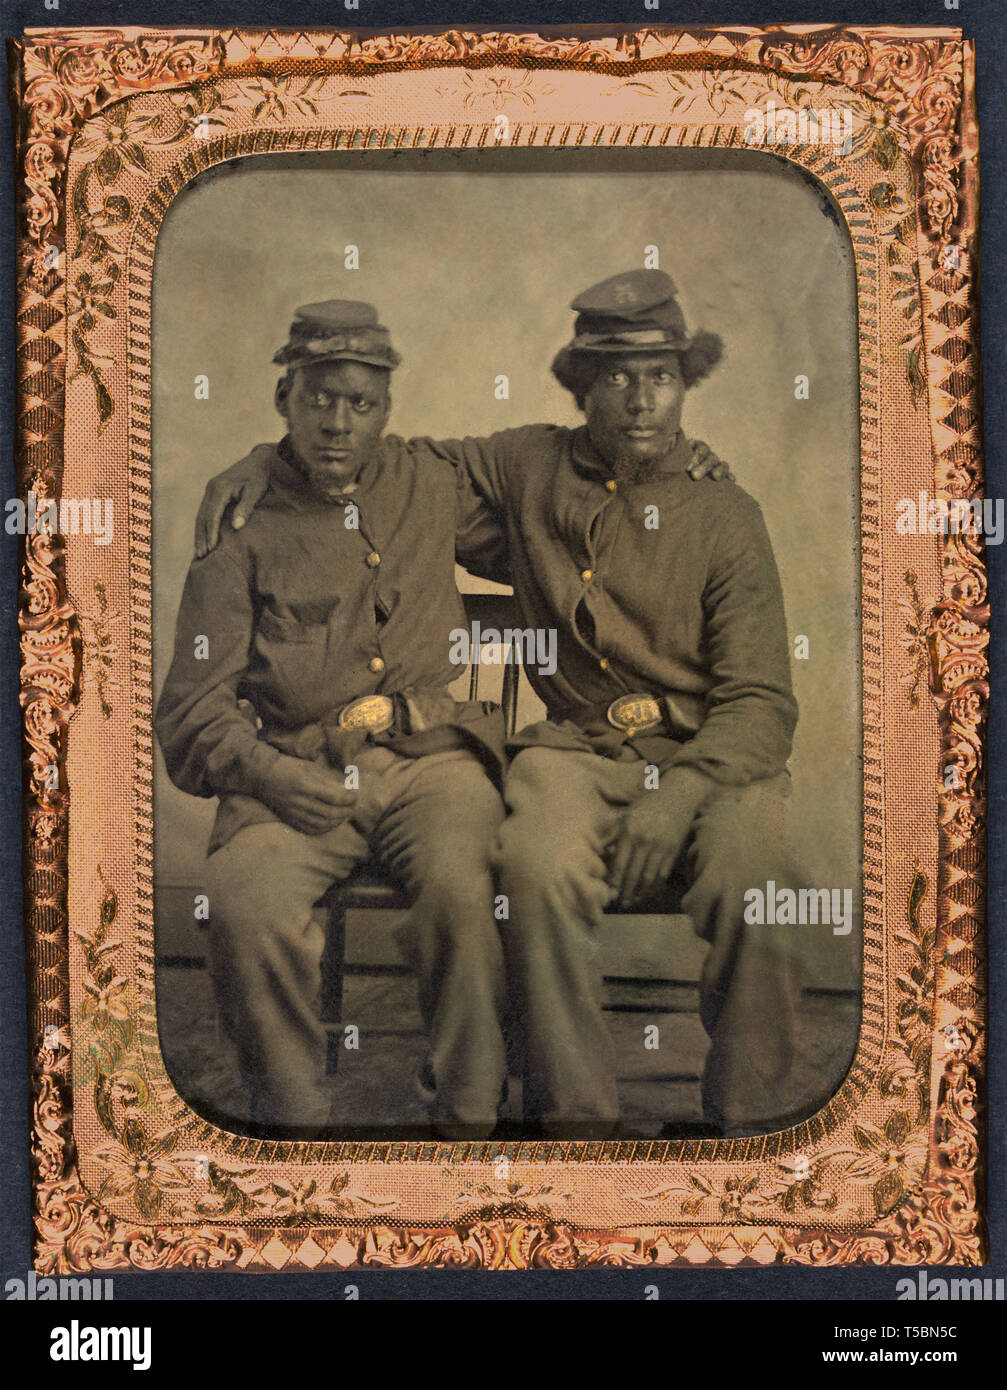 Two African American Union Soldiers, Seated Portrait with Arms around Each other's Shoulders, William A. Gladstone Collection of African American Photographs, 1860's Stock Photo